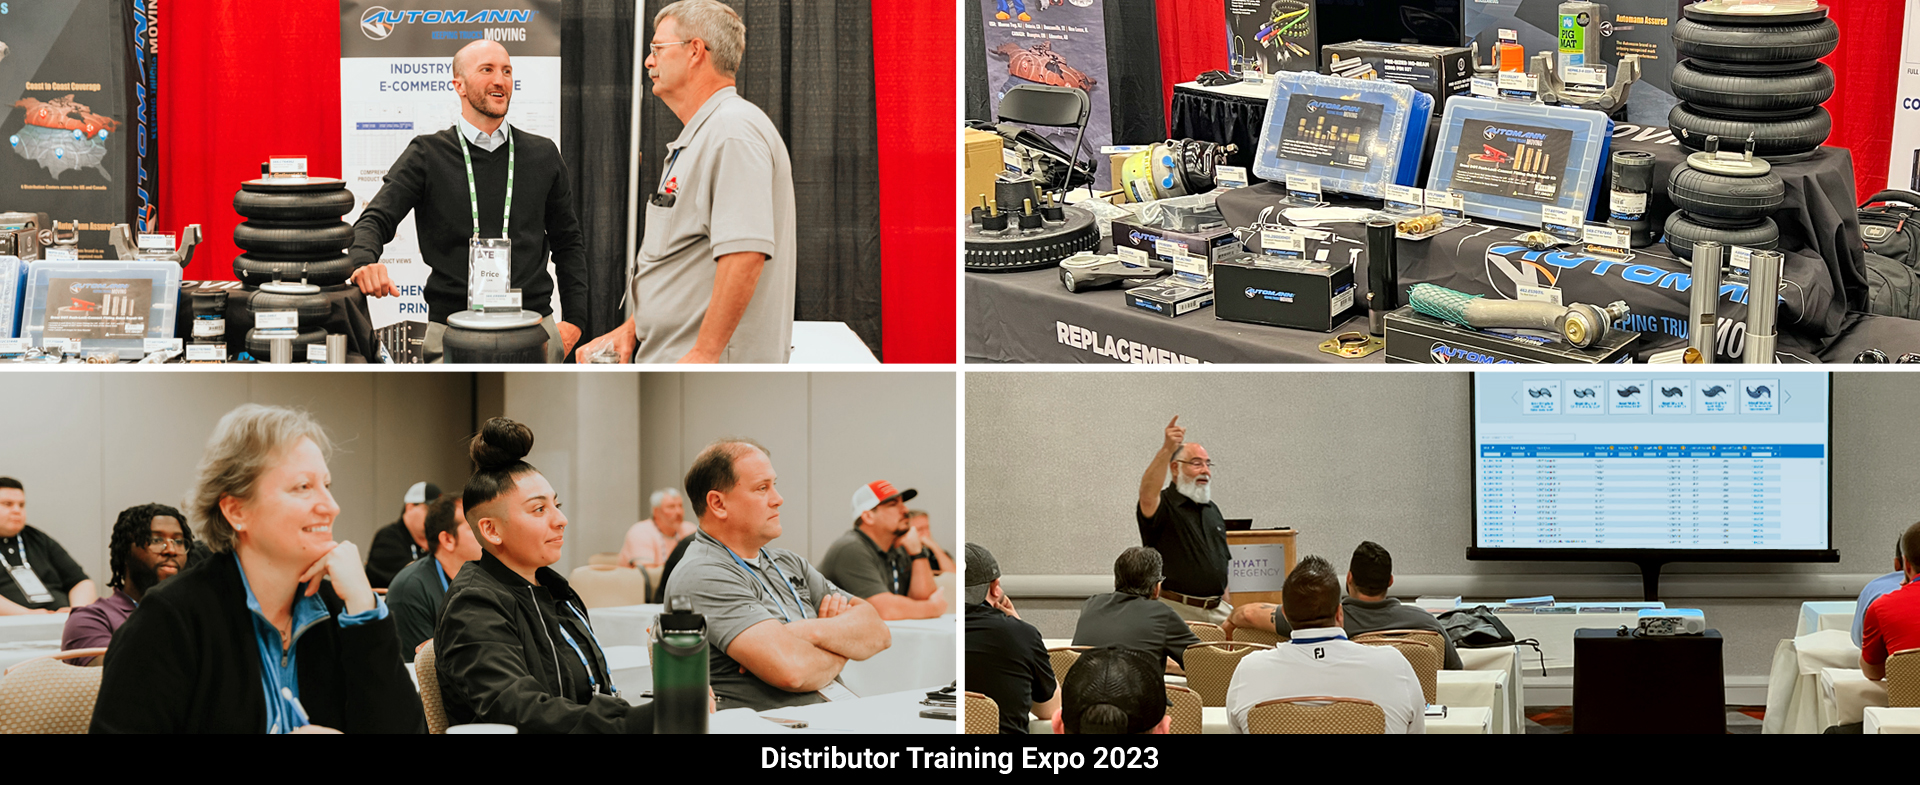 Automann proudly supports 2023 Distributor Training Expo as a Gold Sponsor